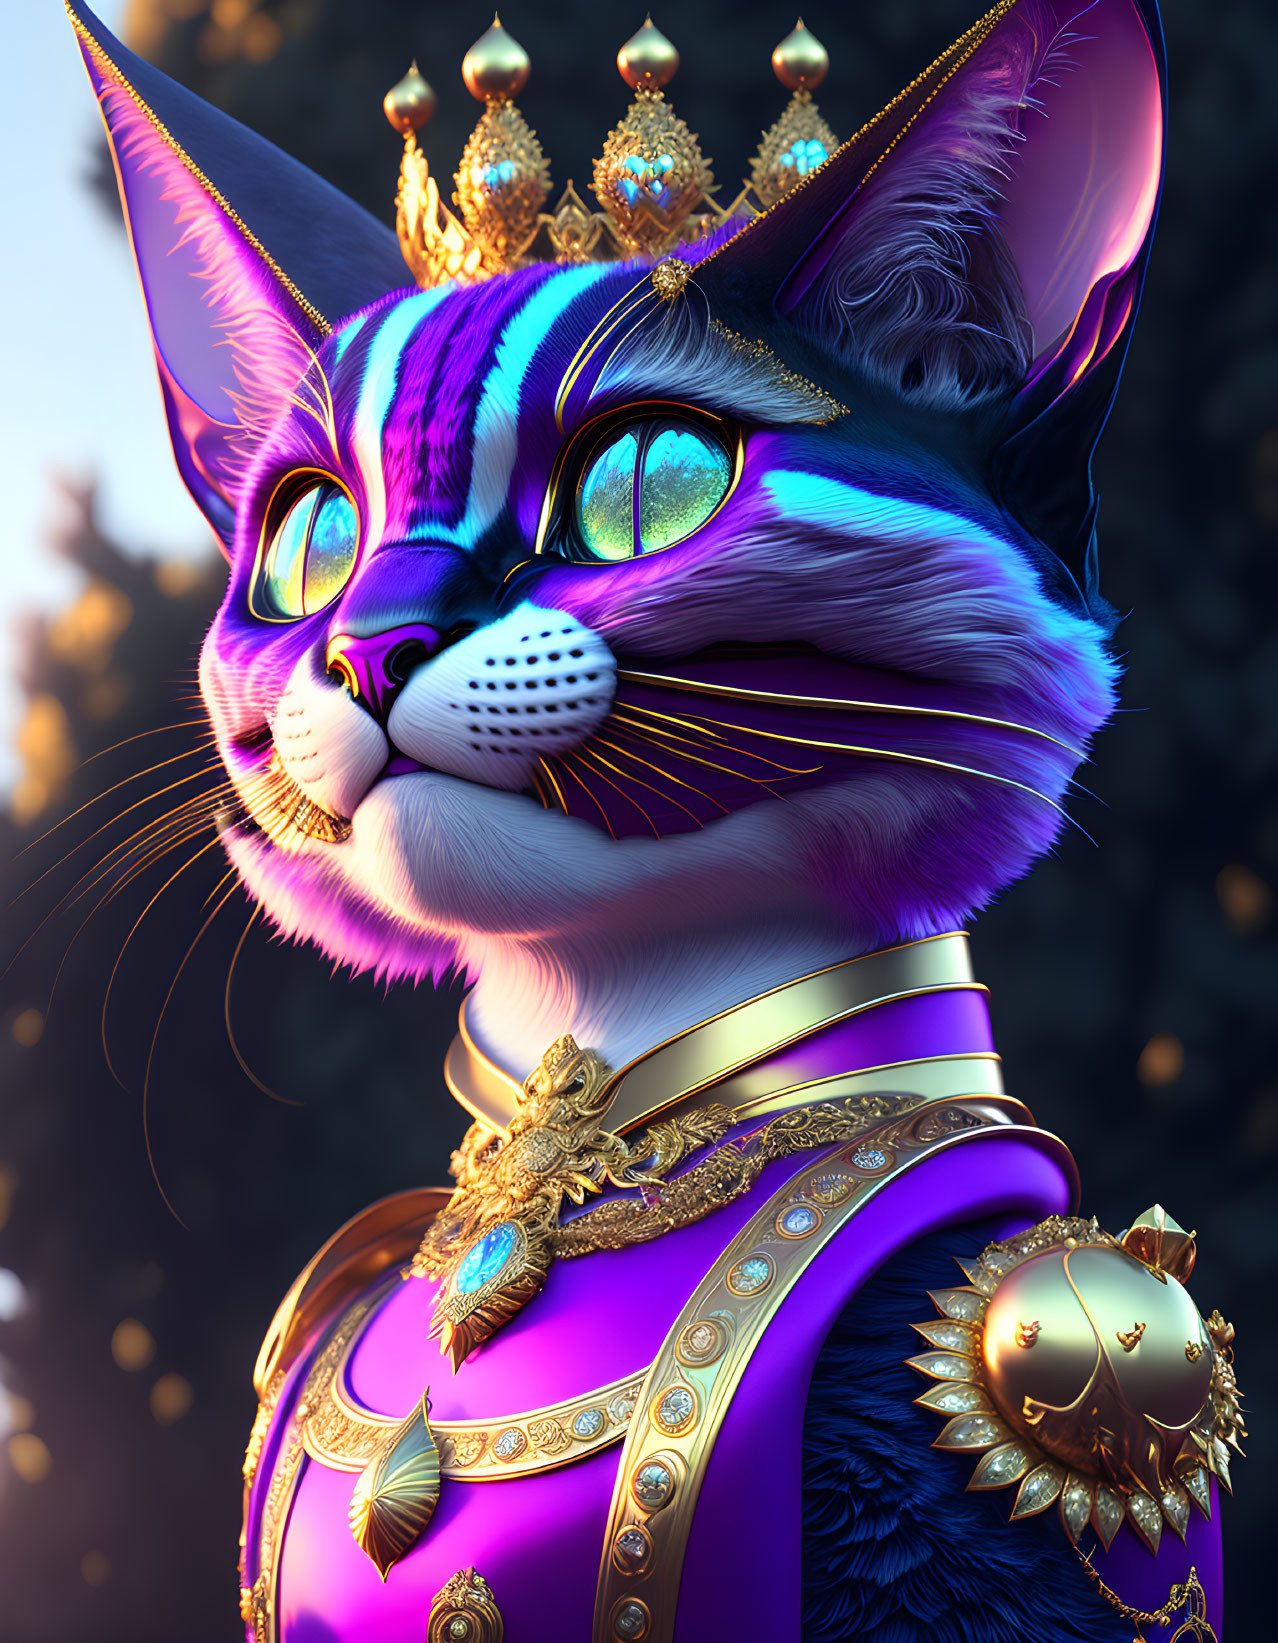 Regal digitally created cat with blue and purple fur in golden crown and ornate garments